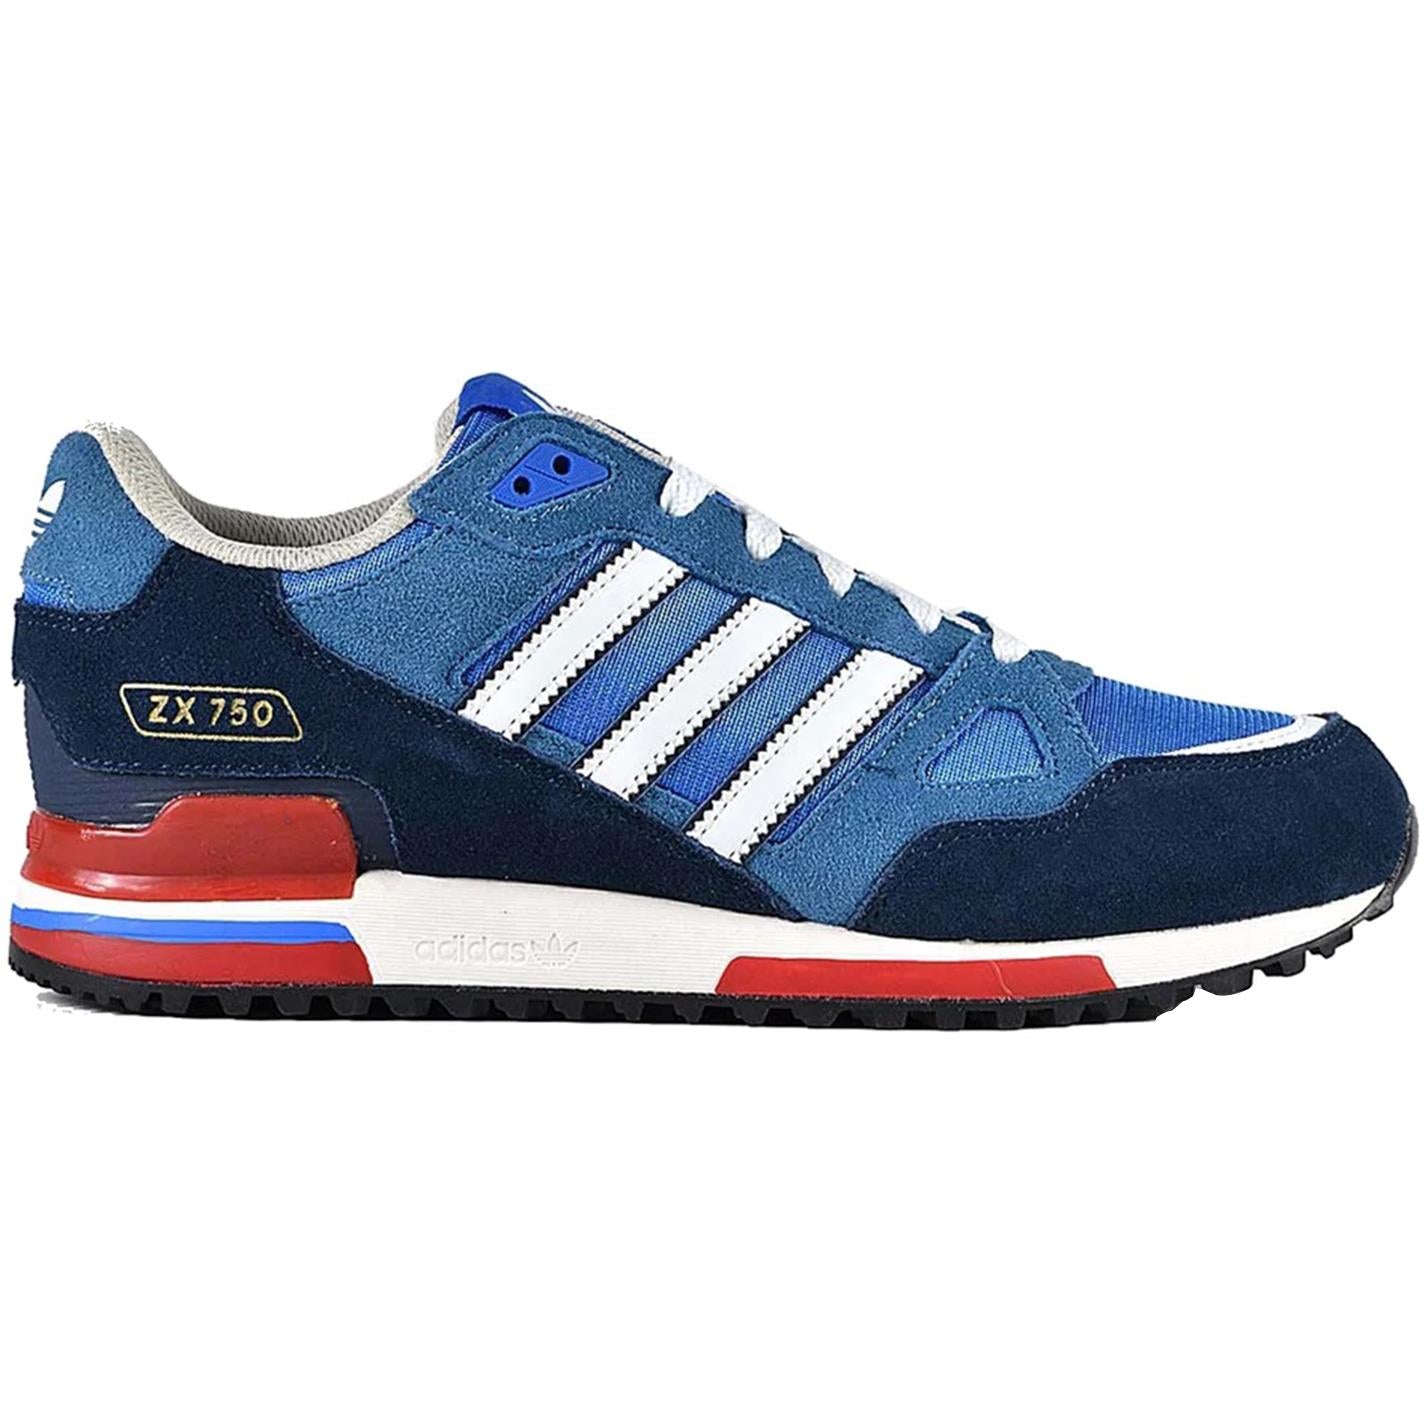 zx adidas trainers